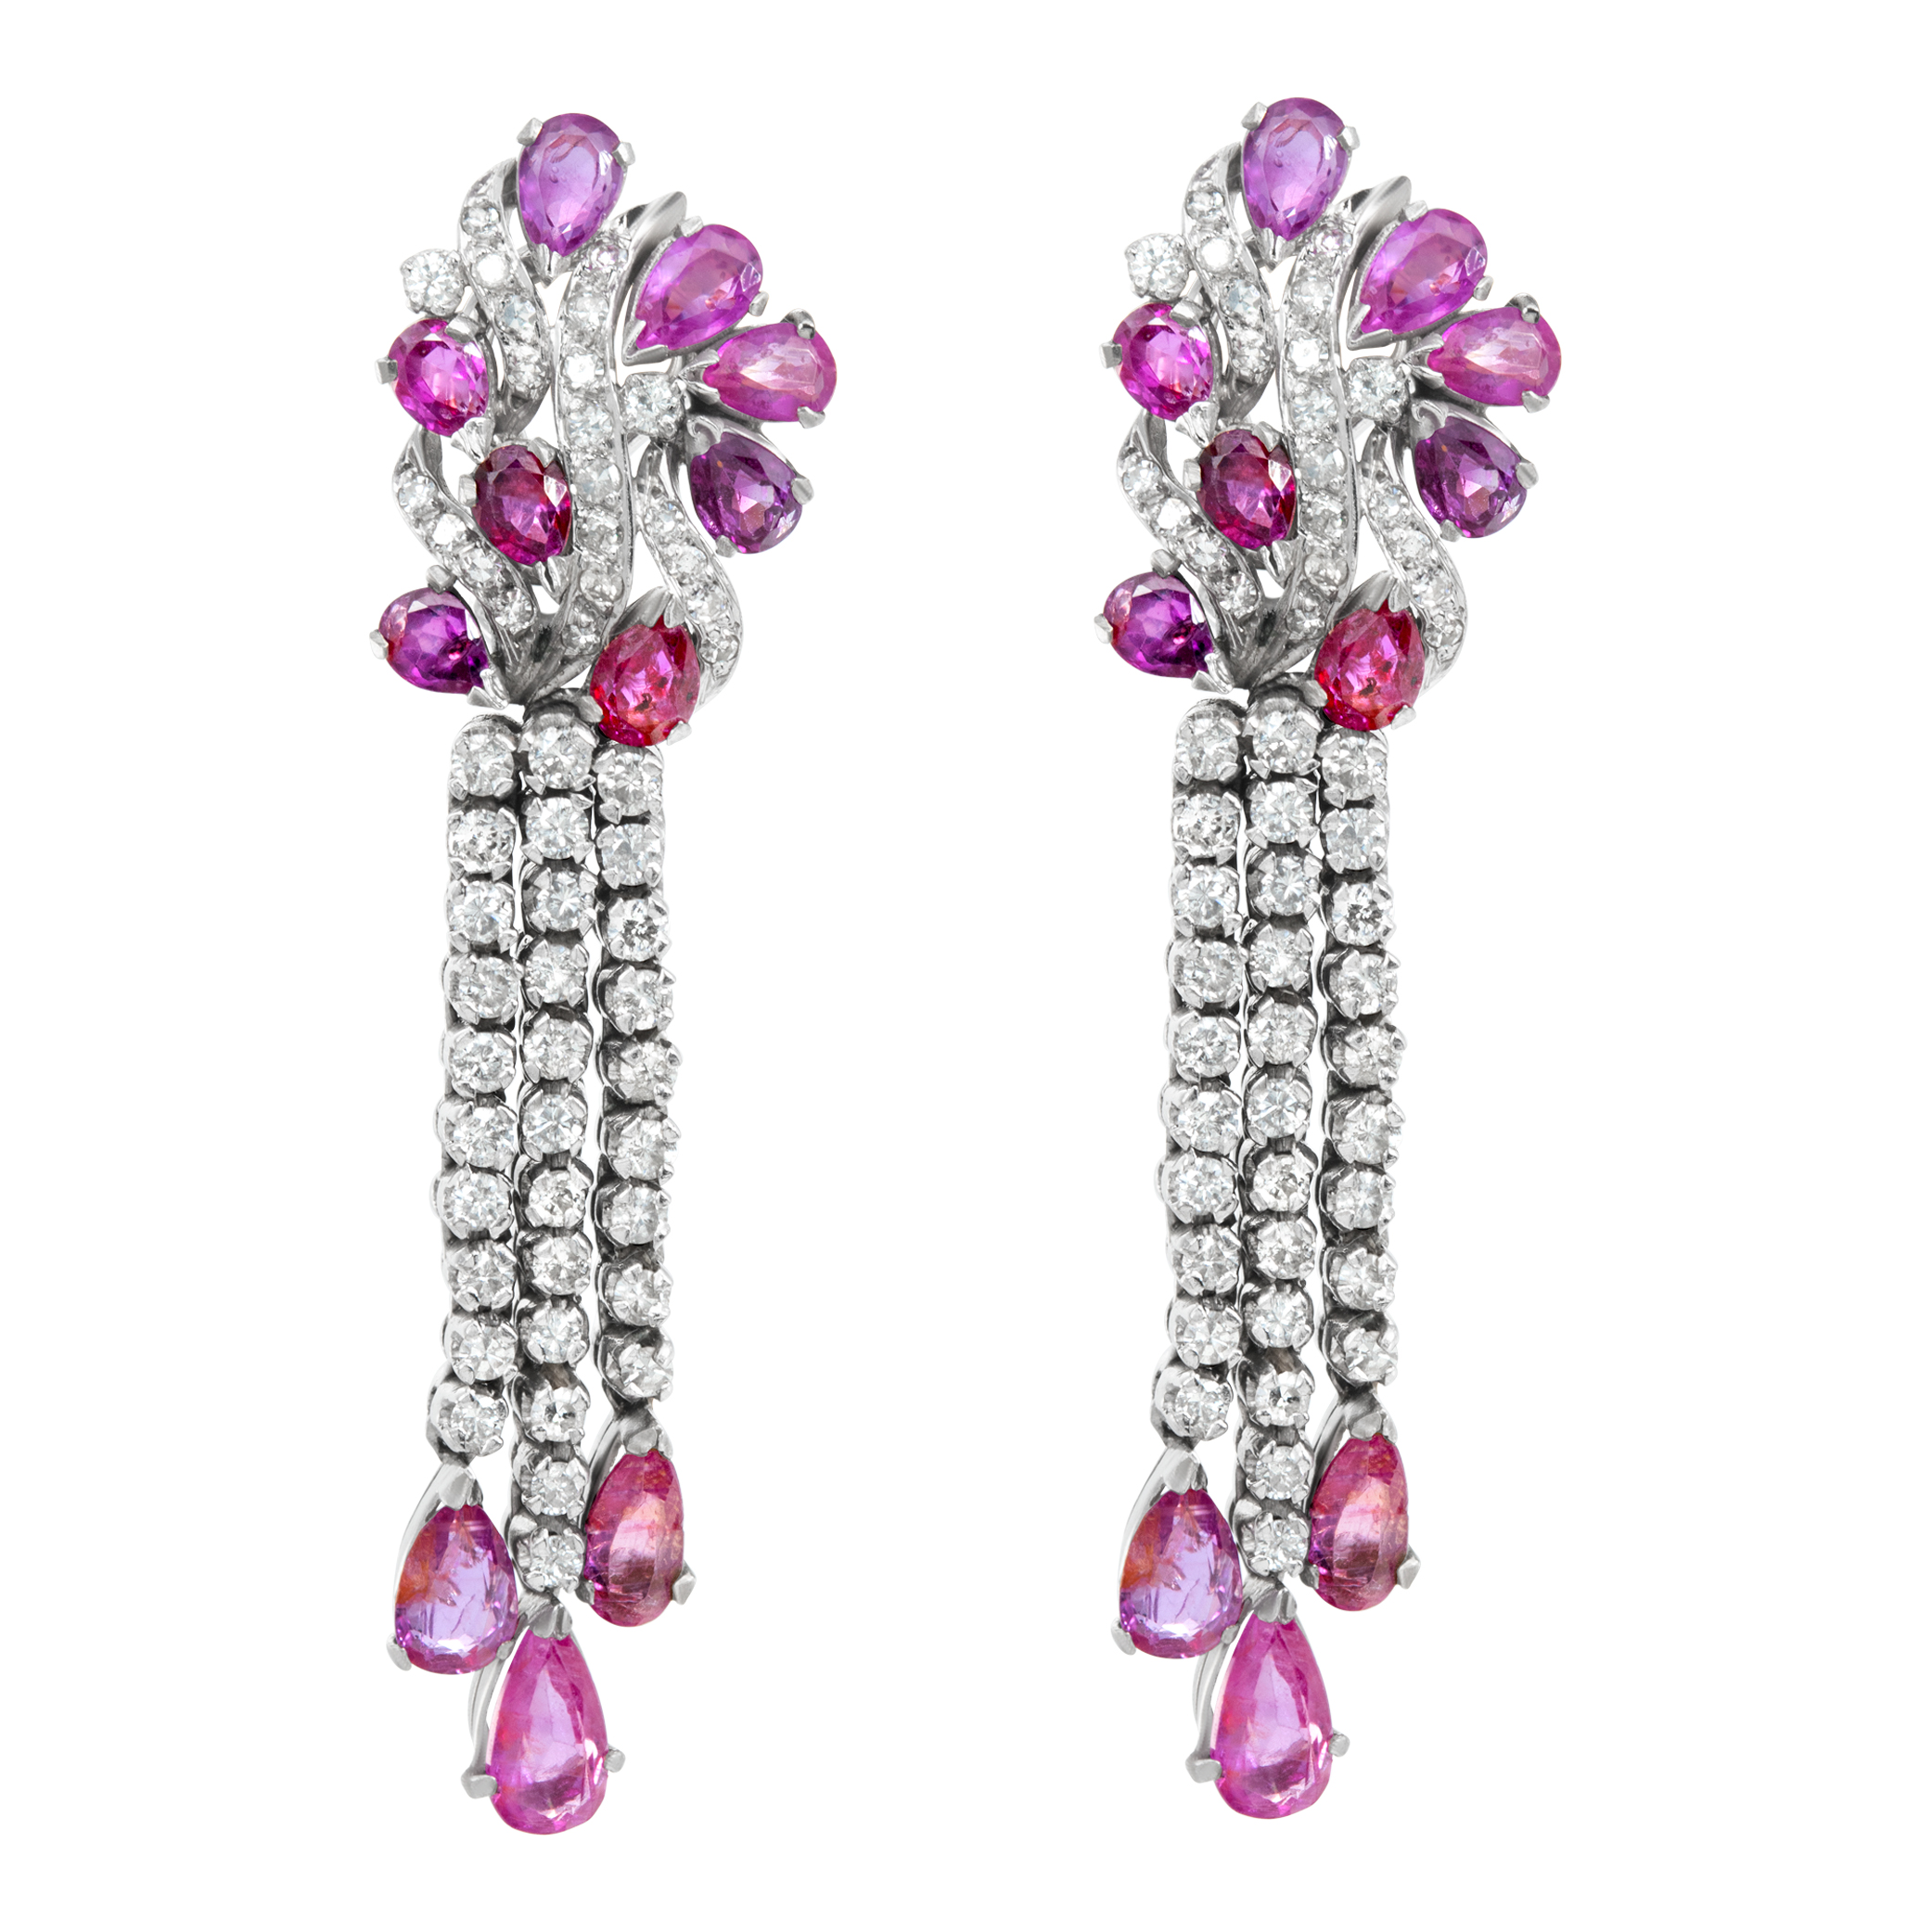 Pink sapphires (4.00 carats) and diamonds (2.00 carats) drop earrings in 14K white gold.